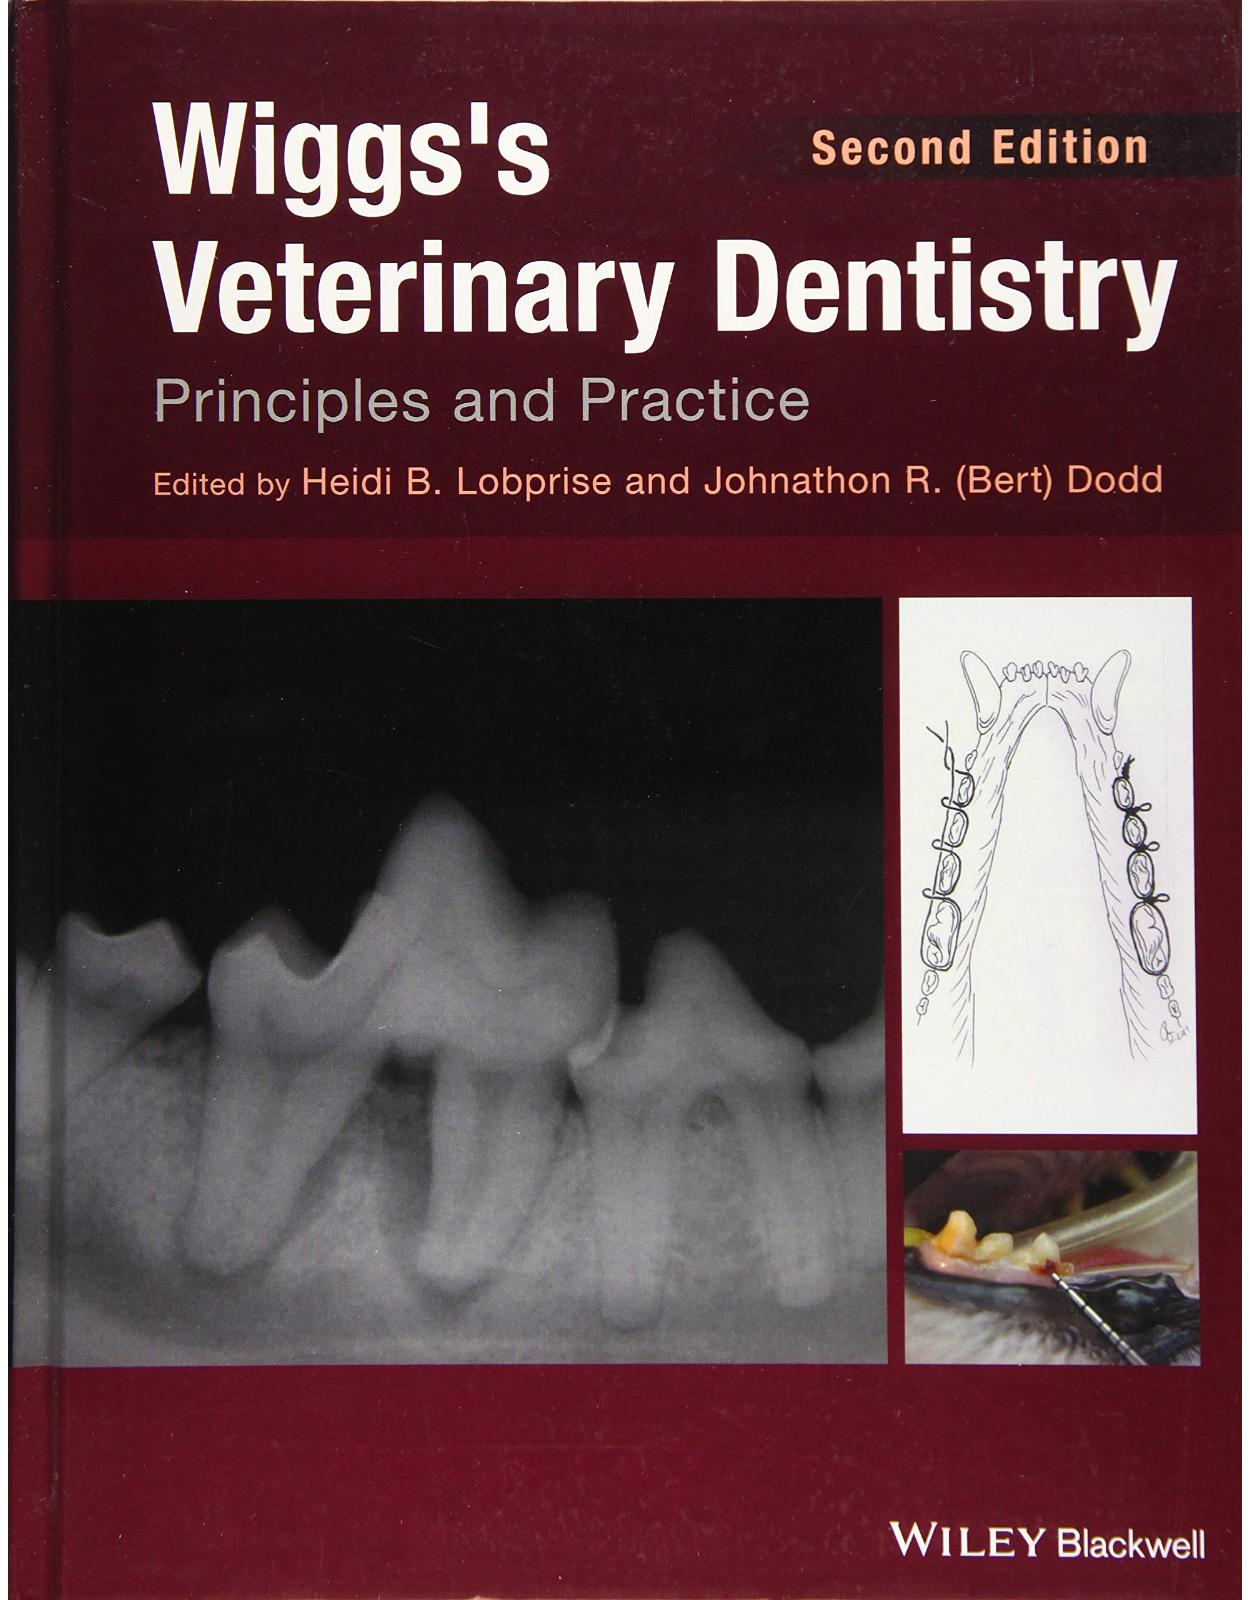 Wiggs′s Veterinary Dentistry: Principles and Practice